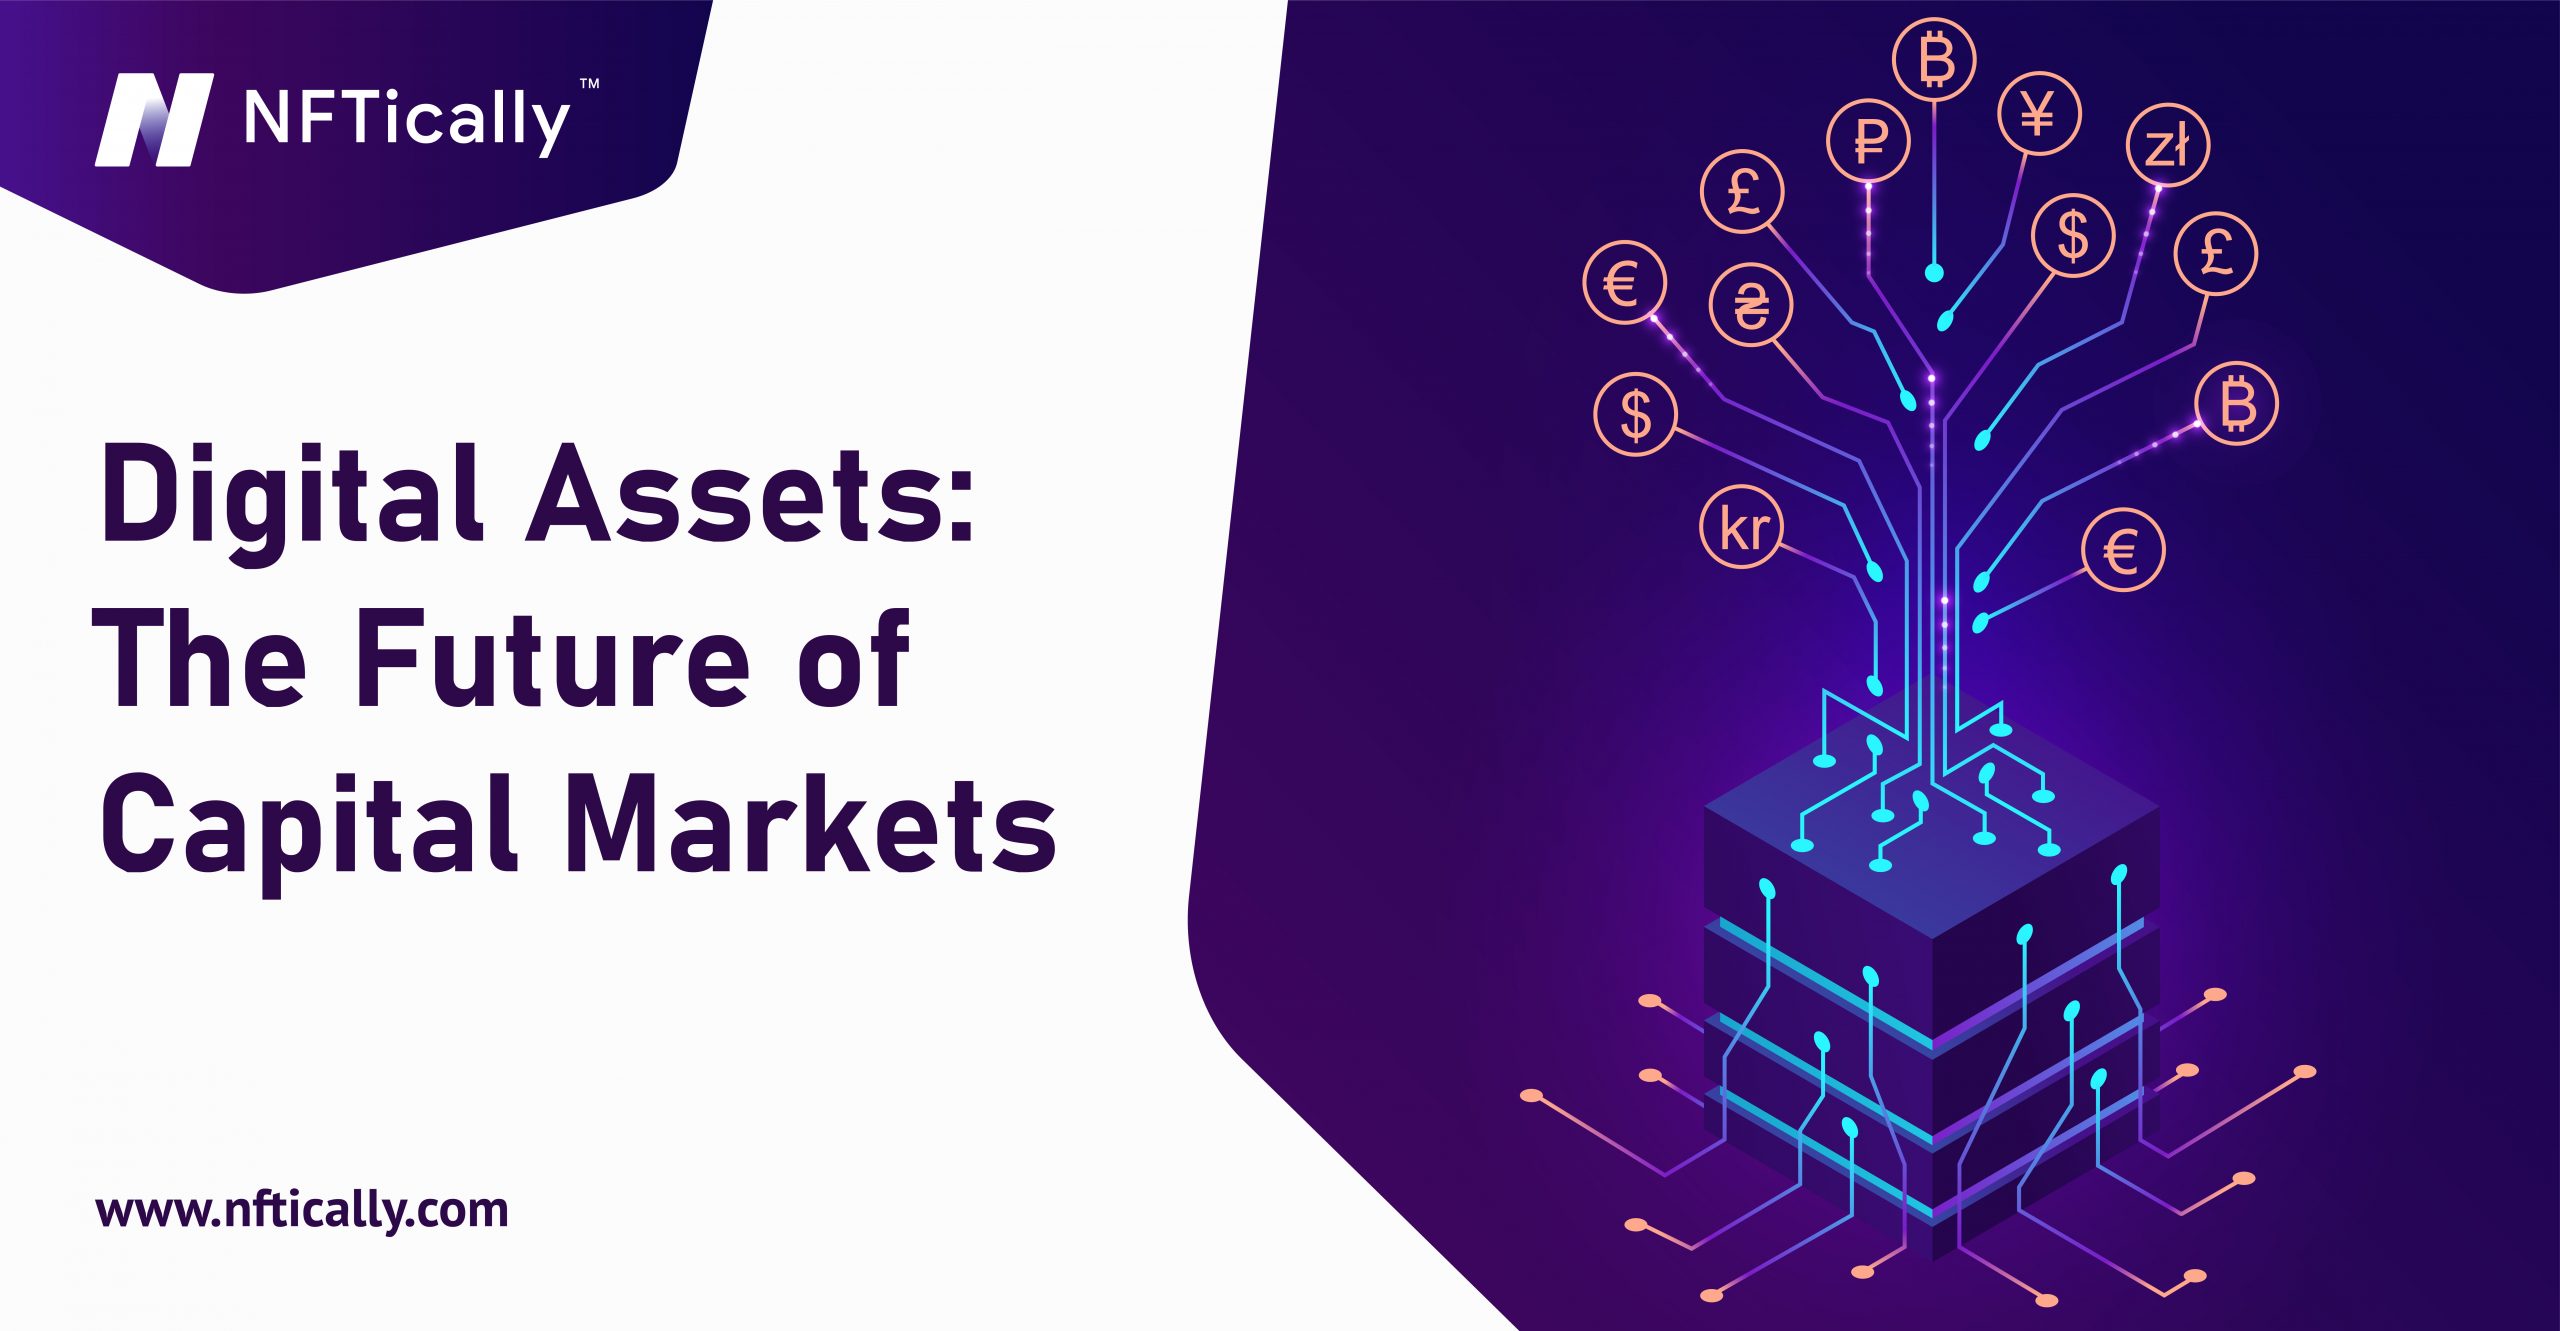 Digital Assets: The Future of Capital Markets